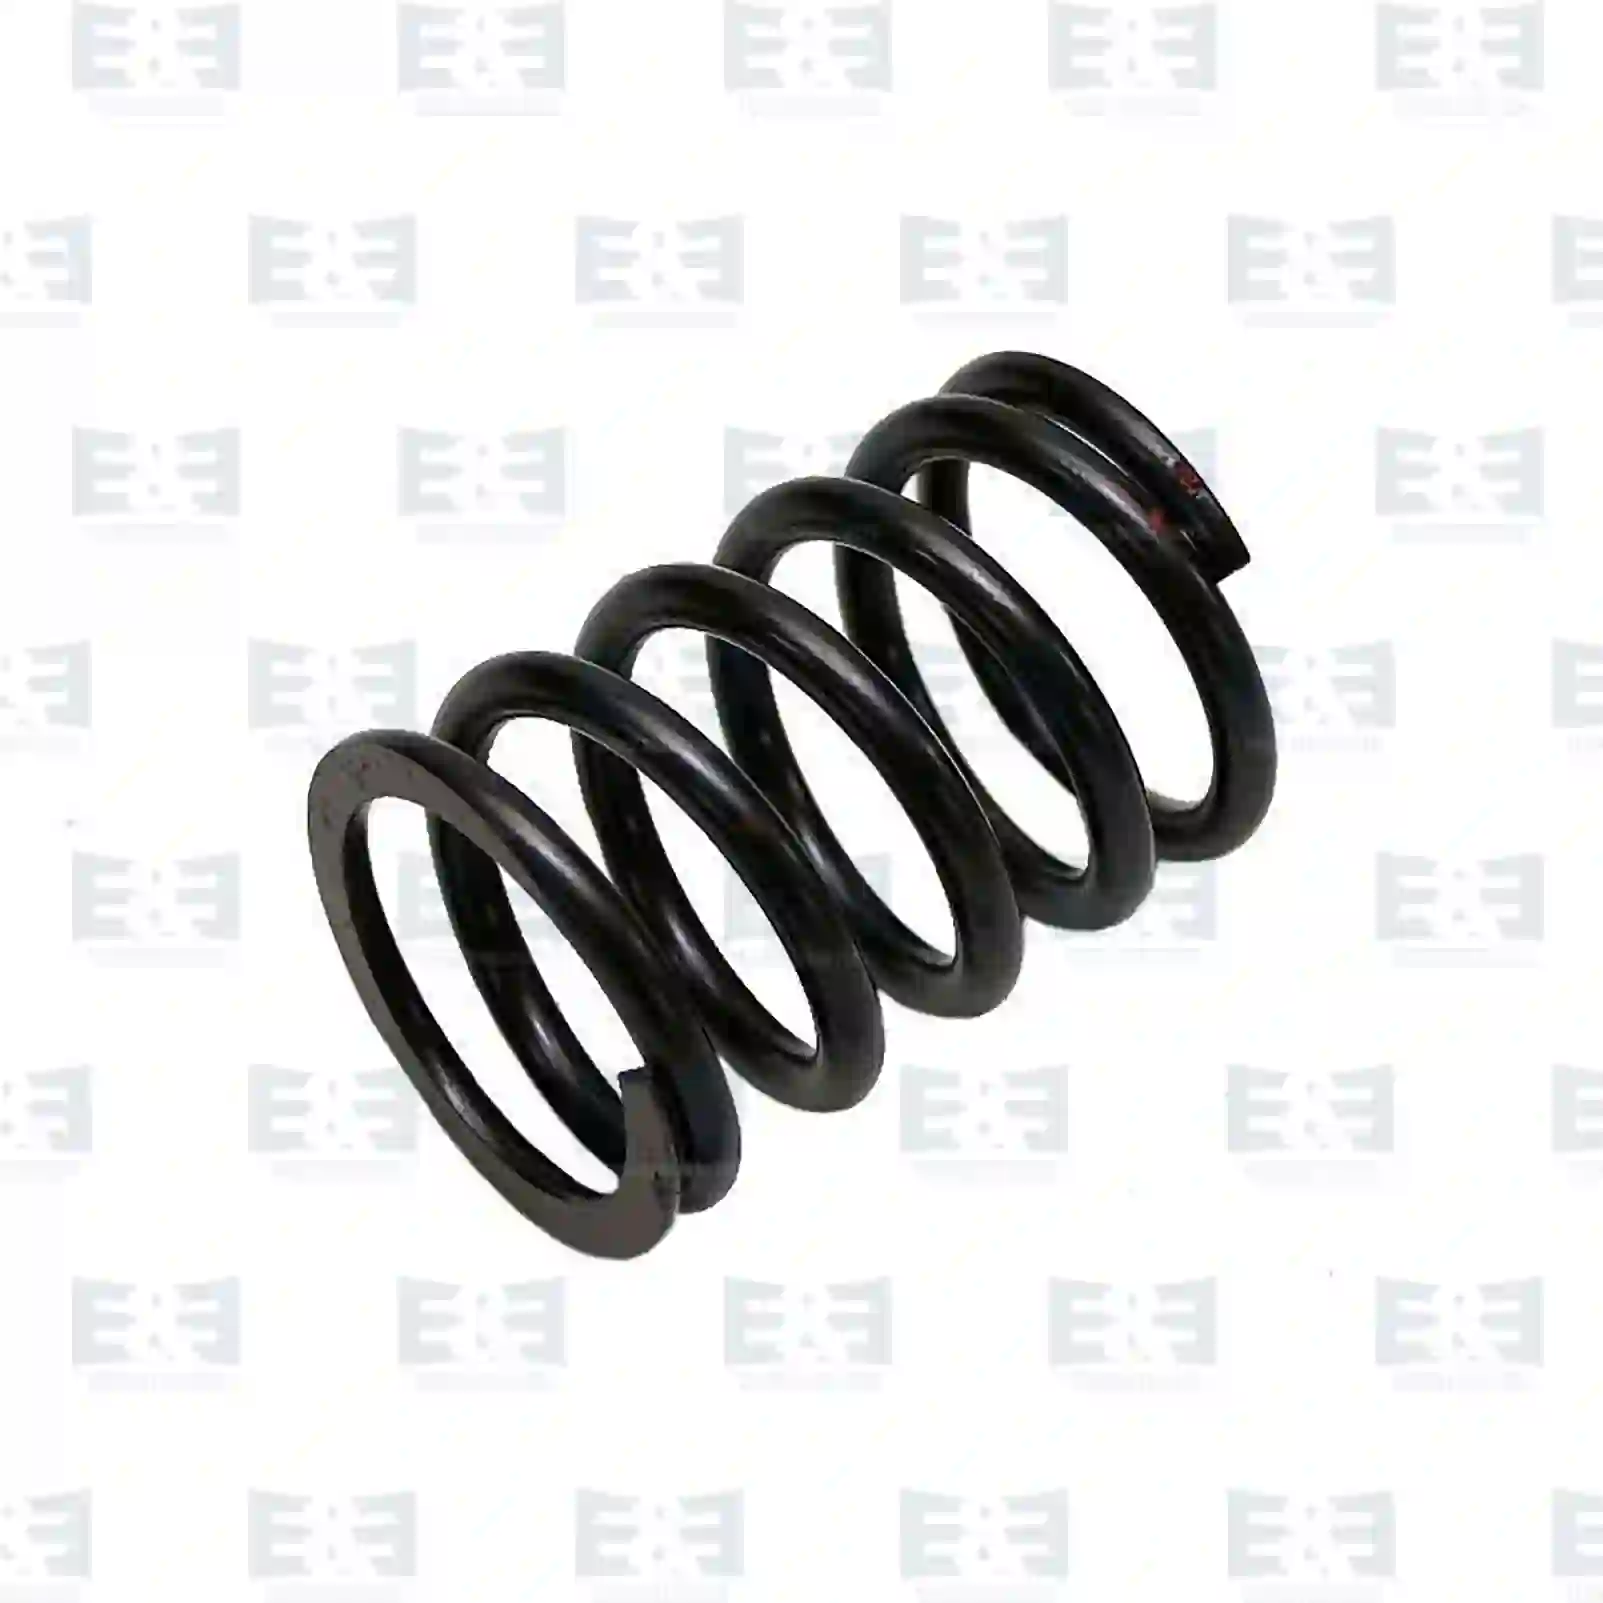  Cylinder Head Valve spring, outer, EE No 2E2208824 ,  oem no:51041020065, 51041020070, 51041020079, 51041020082, 51041020149, 4030530020, 4030530120, 4030530320, 4030530820 E&E Truck Spare Parts | Truck Spare Parts, Auotomotive Spare Parts